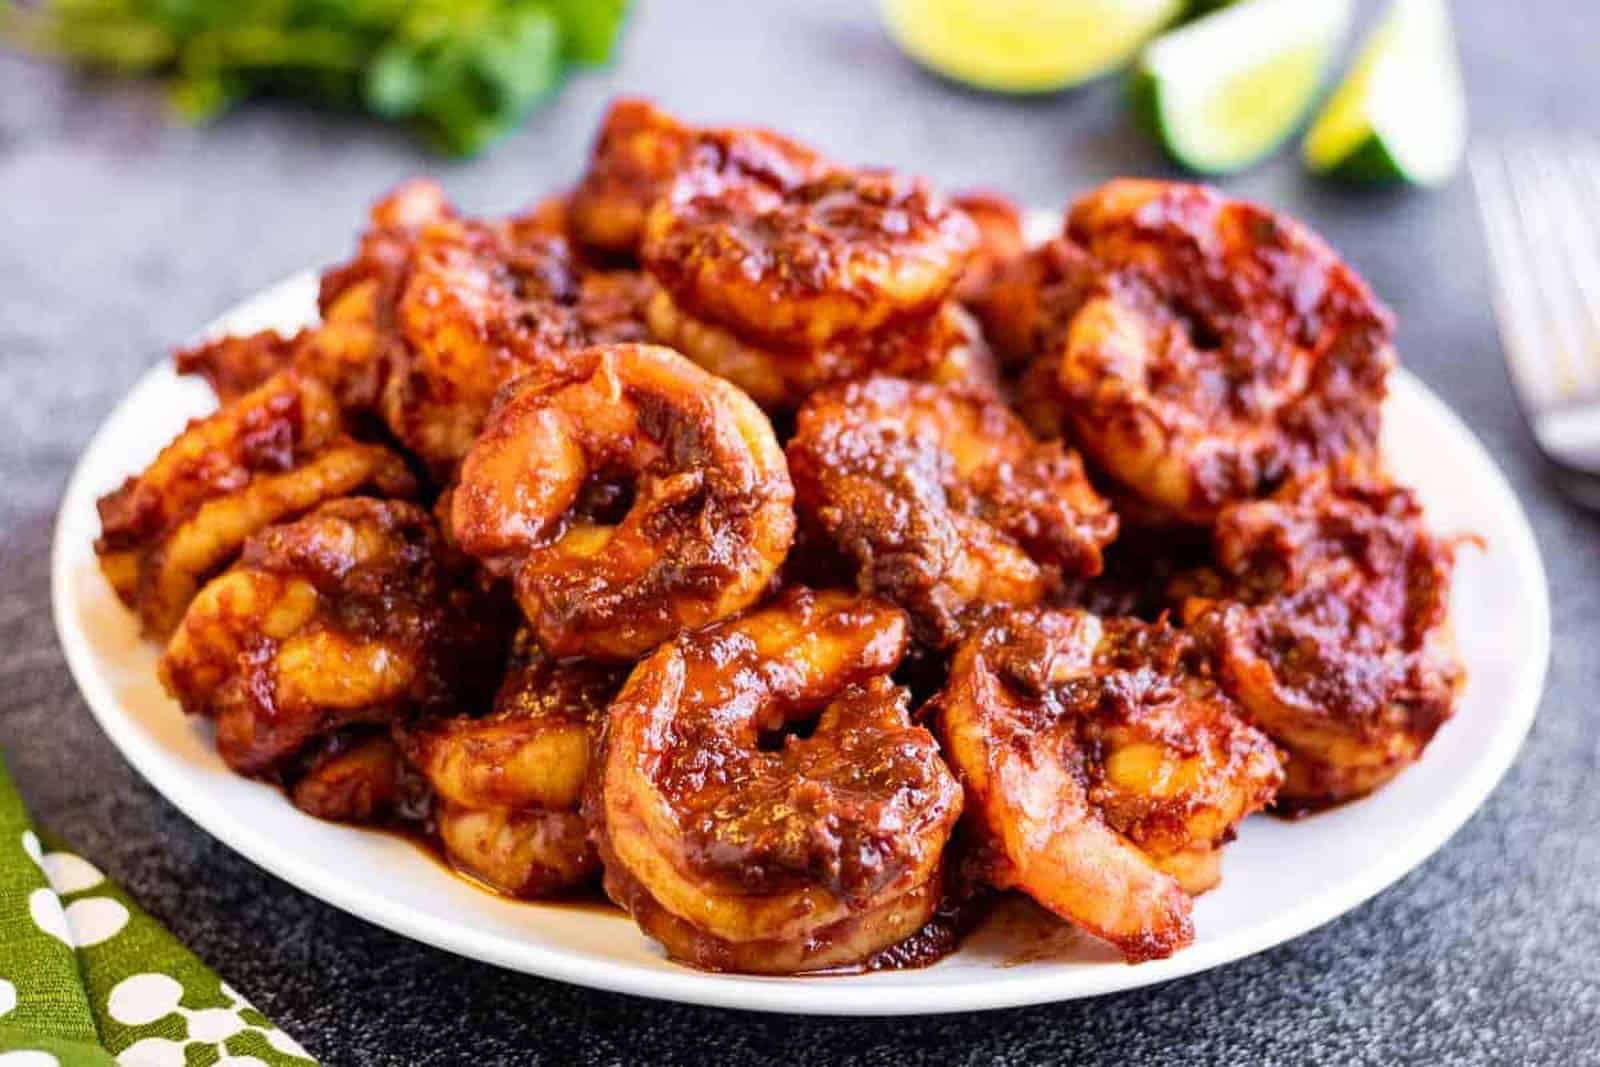 <p>Spice things up at your dinner table with Camarones a la Diabla. This delicious shrimp dish is full of flavor, and you’ll find yourself craving this spicy delight as soon as you’ve finished your plate.<br><strong>Get the Recipe: </strong><a href="https://allwaysdelicious.com/camarones-a-la-diabla/?utm_source=msn&utm_medium=page&utm_campaign=msn">Camarones a la Diabla</a></p>